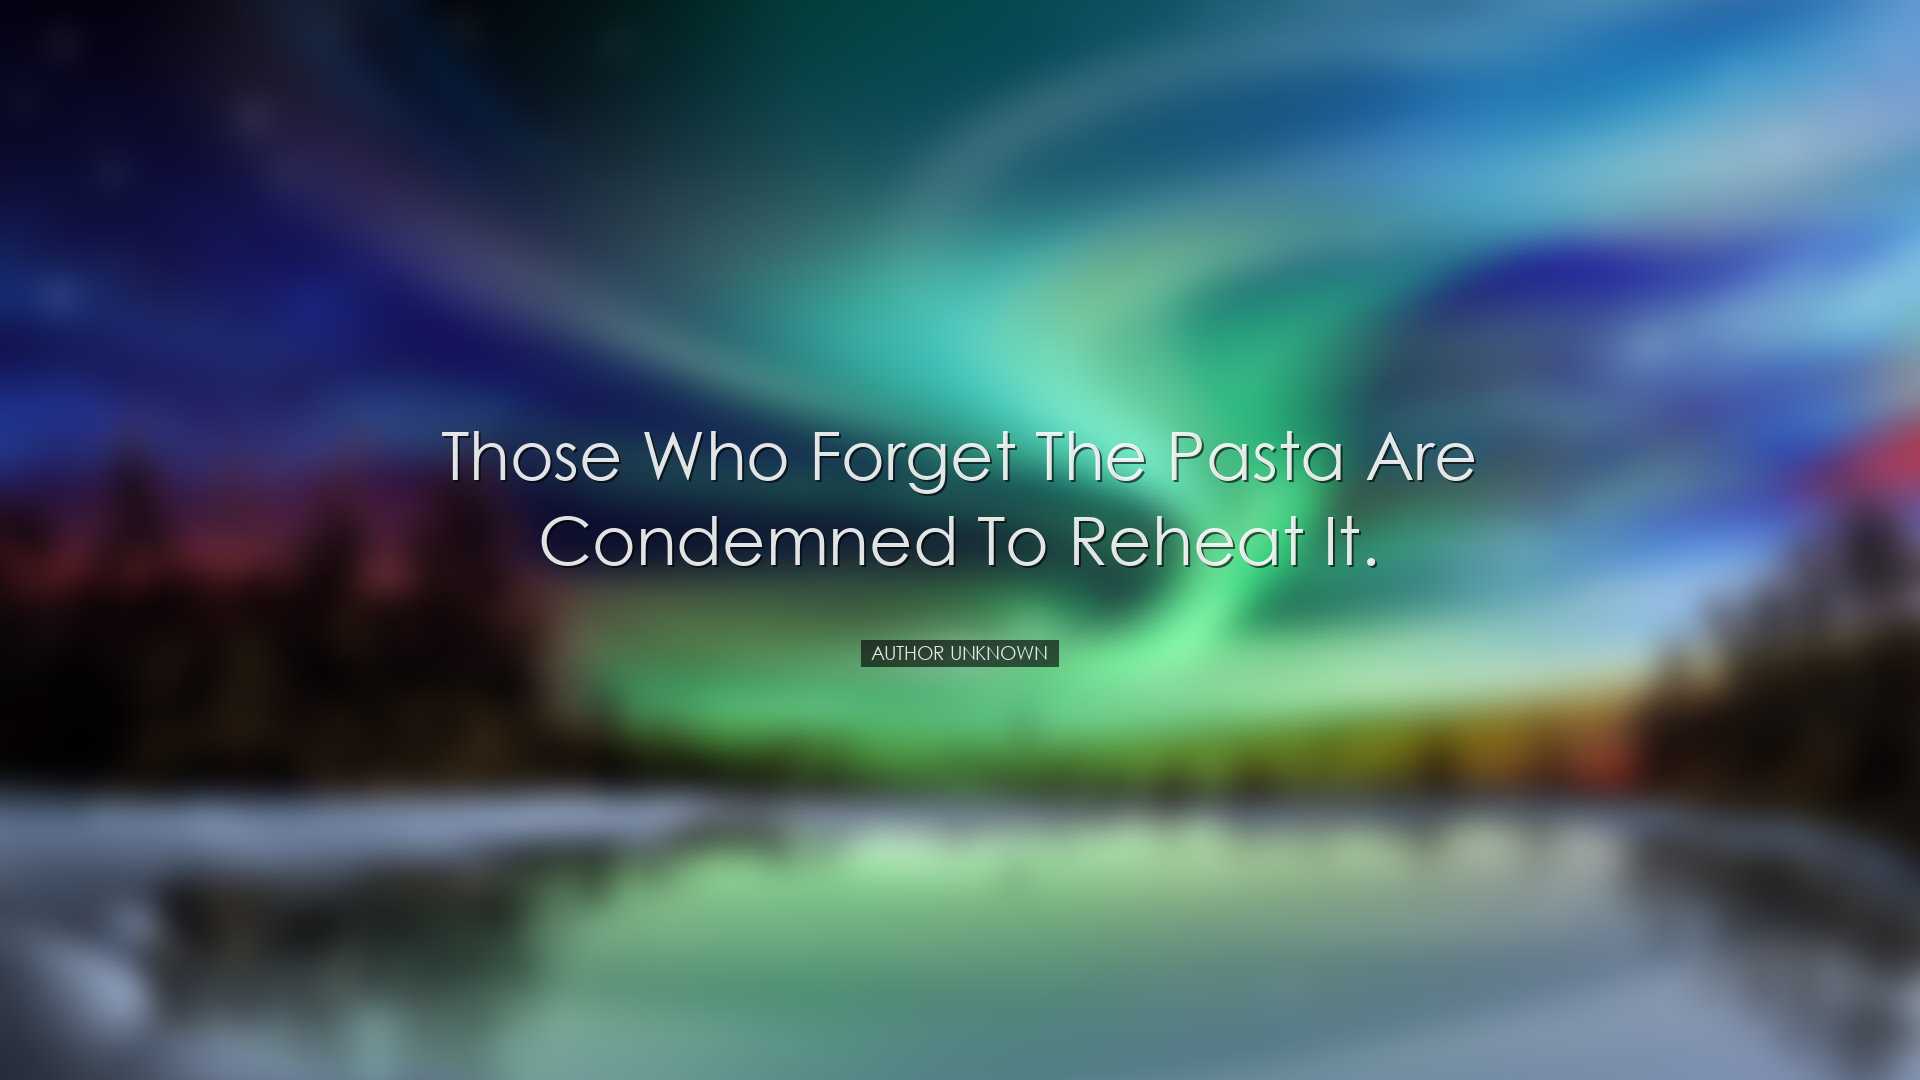 Those who forget the pasta are condemned to reheat it. - Author Un